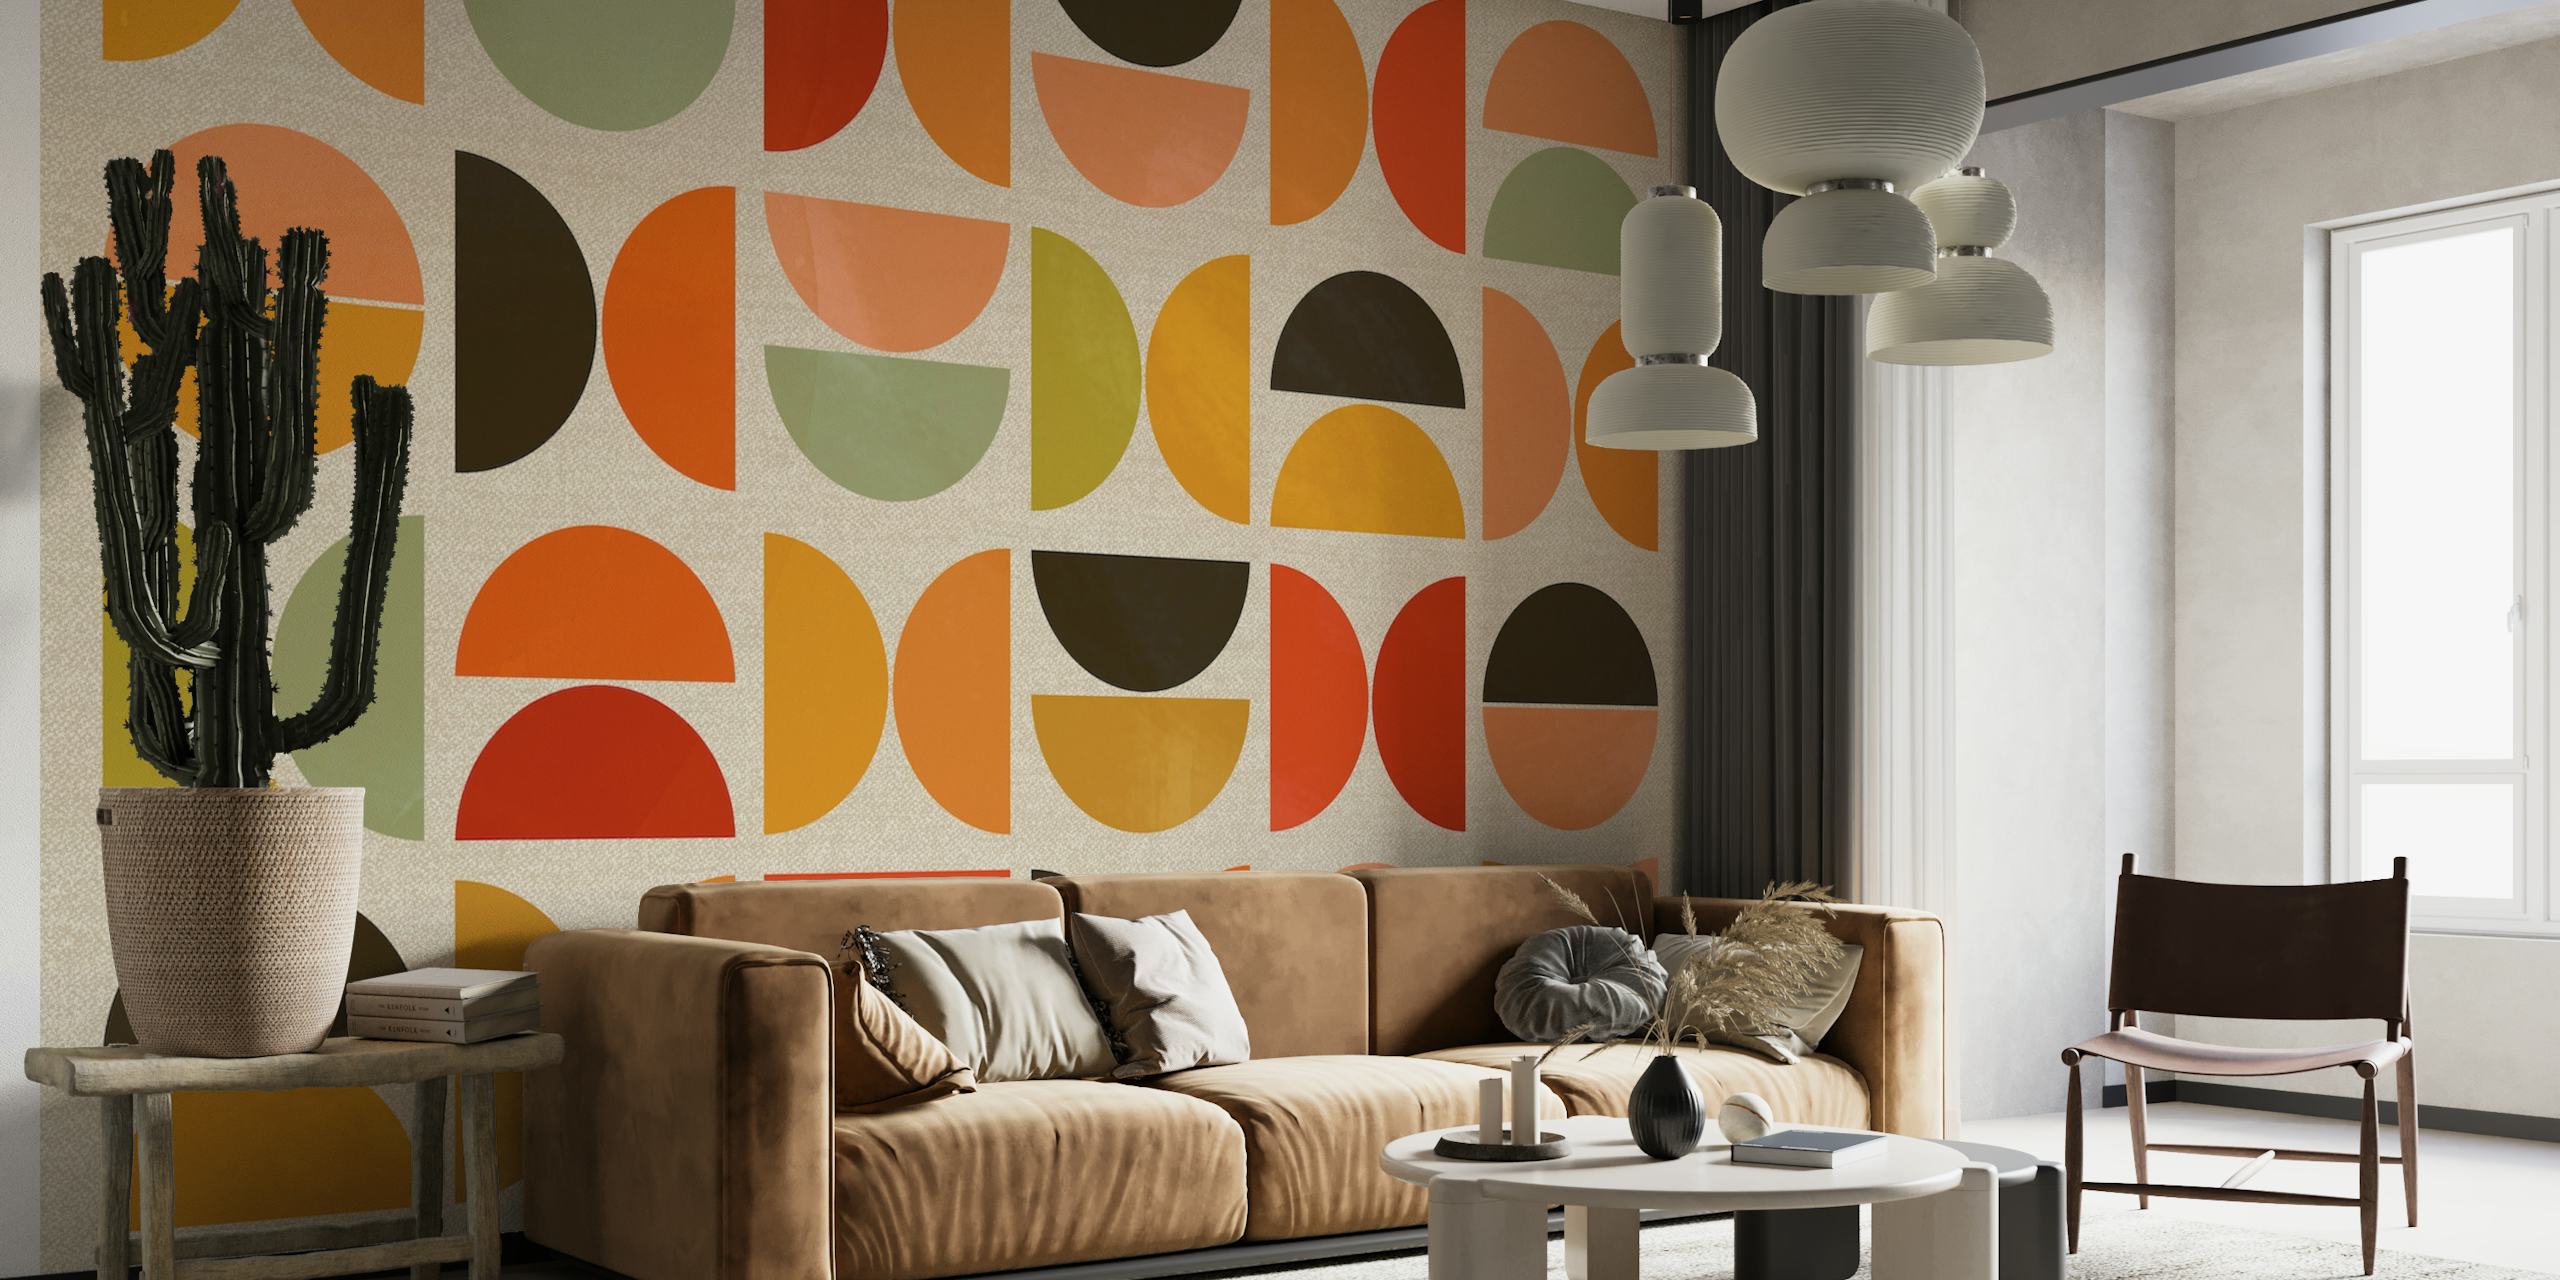 Abstract semi-circular shapes and dashes in watercolor tones of orange, green, and brown on a cream wall mural